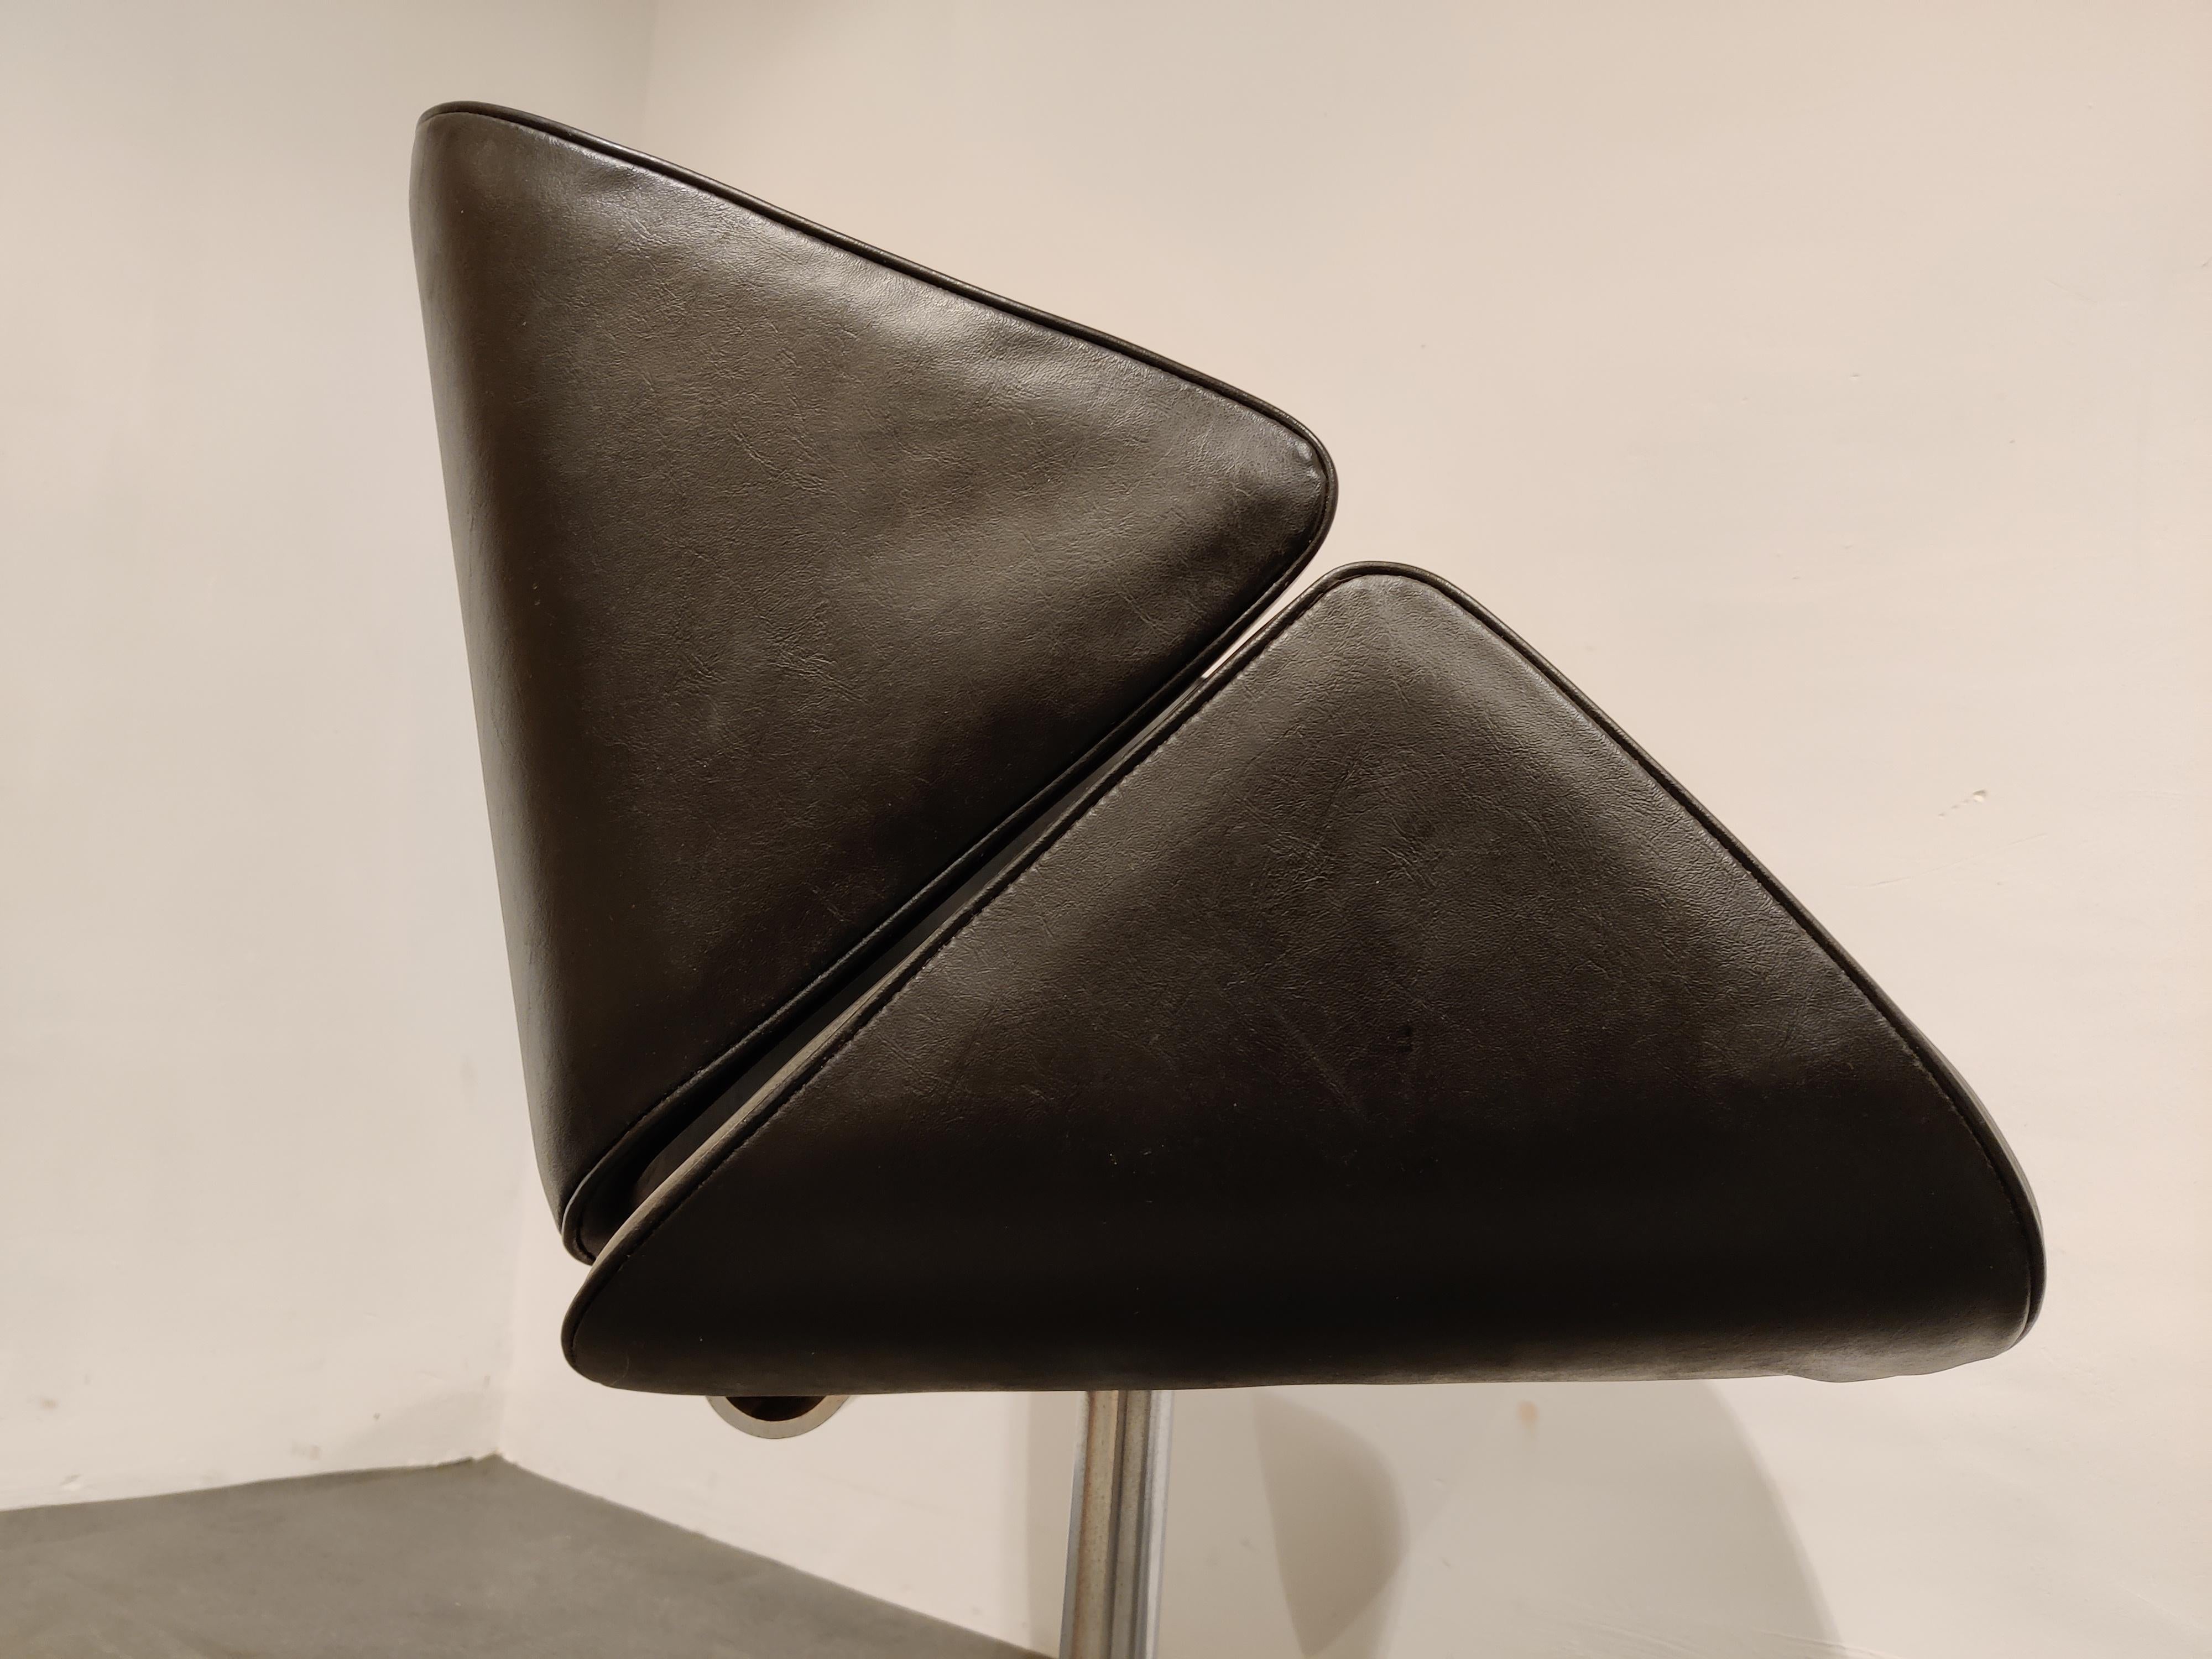 Pair of Minimalist design leather armchairs designed by Geoffrey Harcourt in the 1960s. 

The chair's model name is 'exquis' and they where produced by artifort.

These are quite rare and have a, in our own opinion, beautiful timeless design.